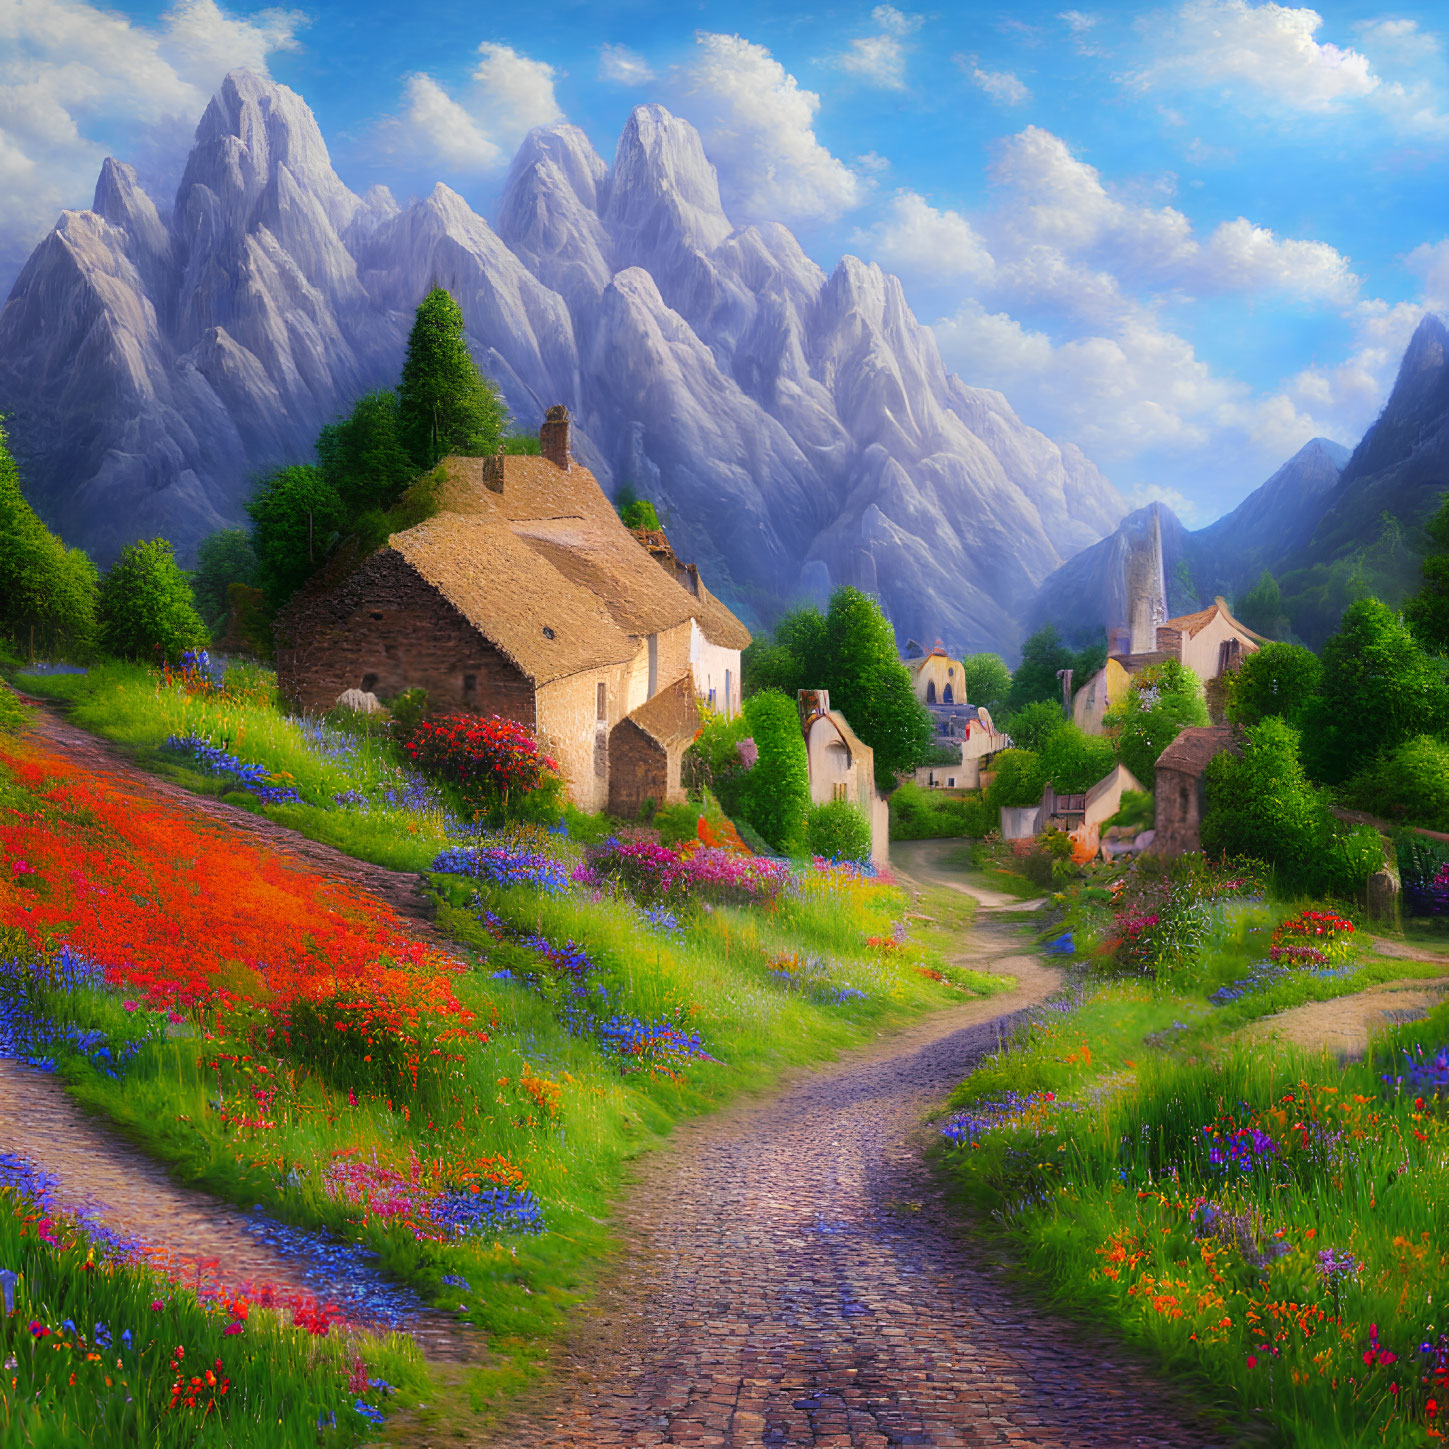 Scenic village with cobblestone path, wildflowers, stone houses, and mountains